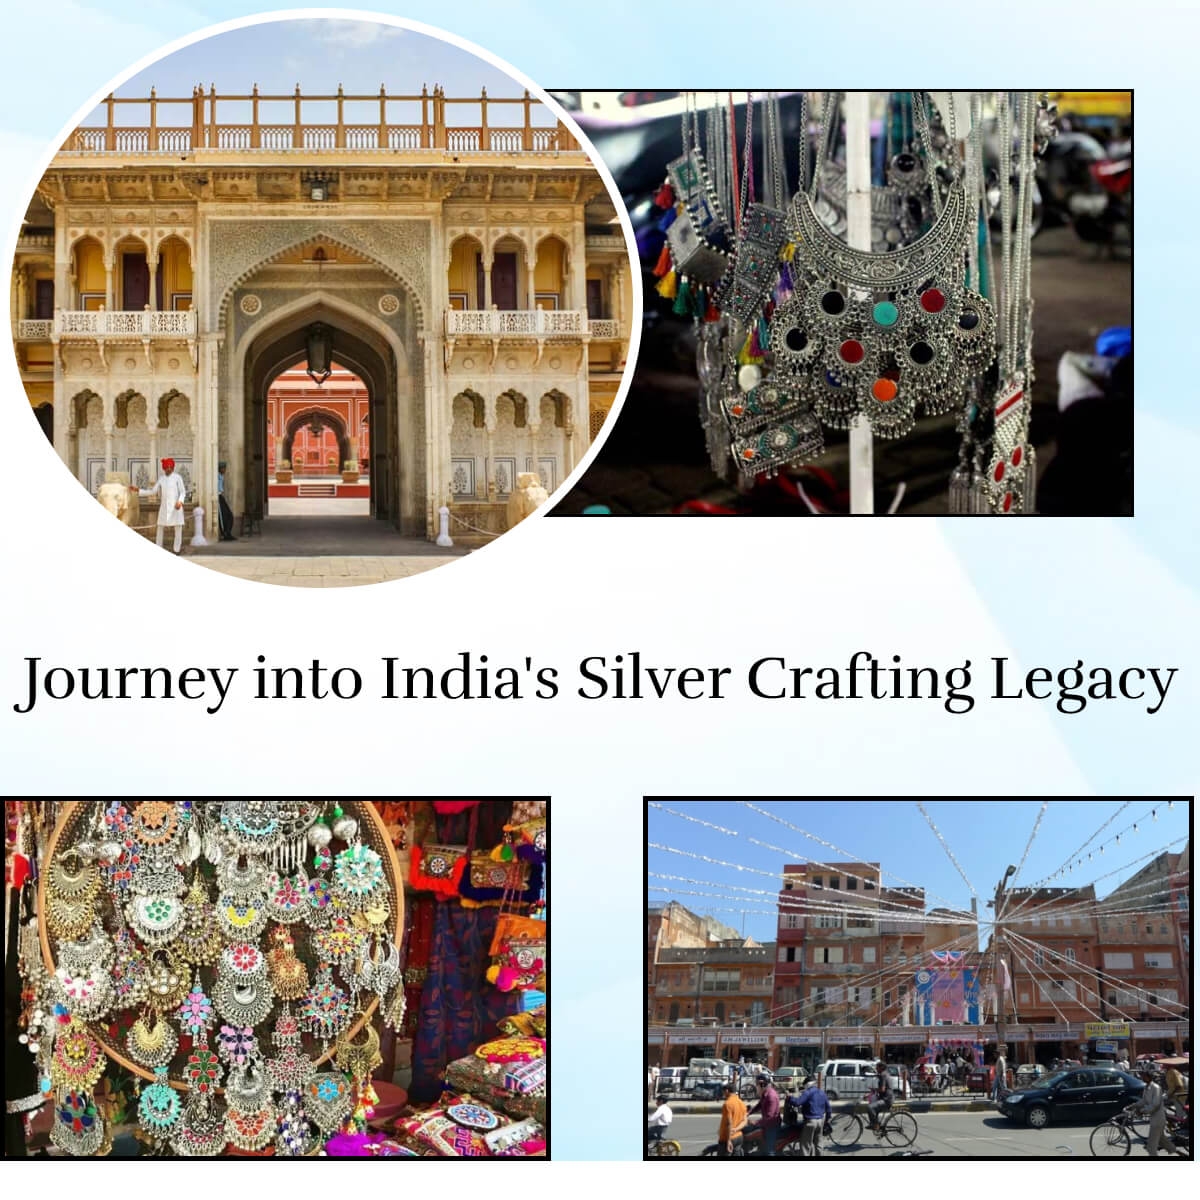 Chronicle of handcrafted silver jewelry in India